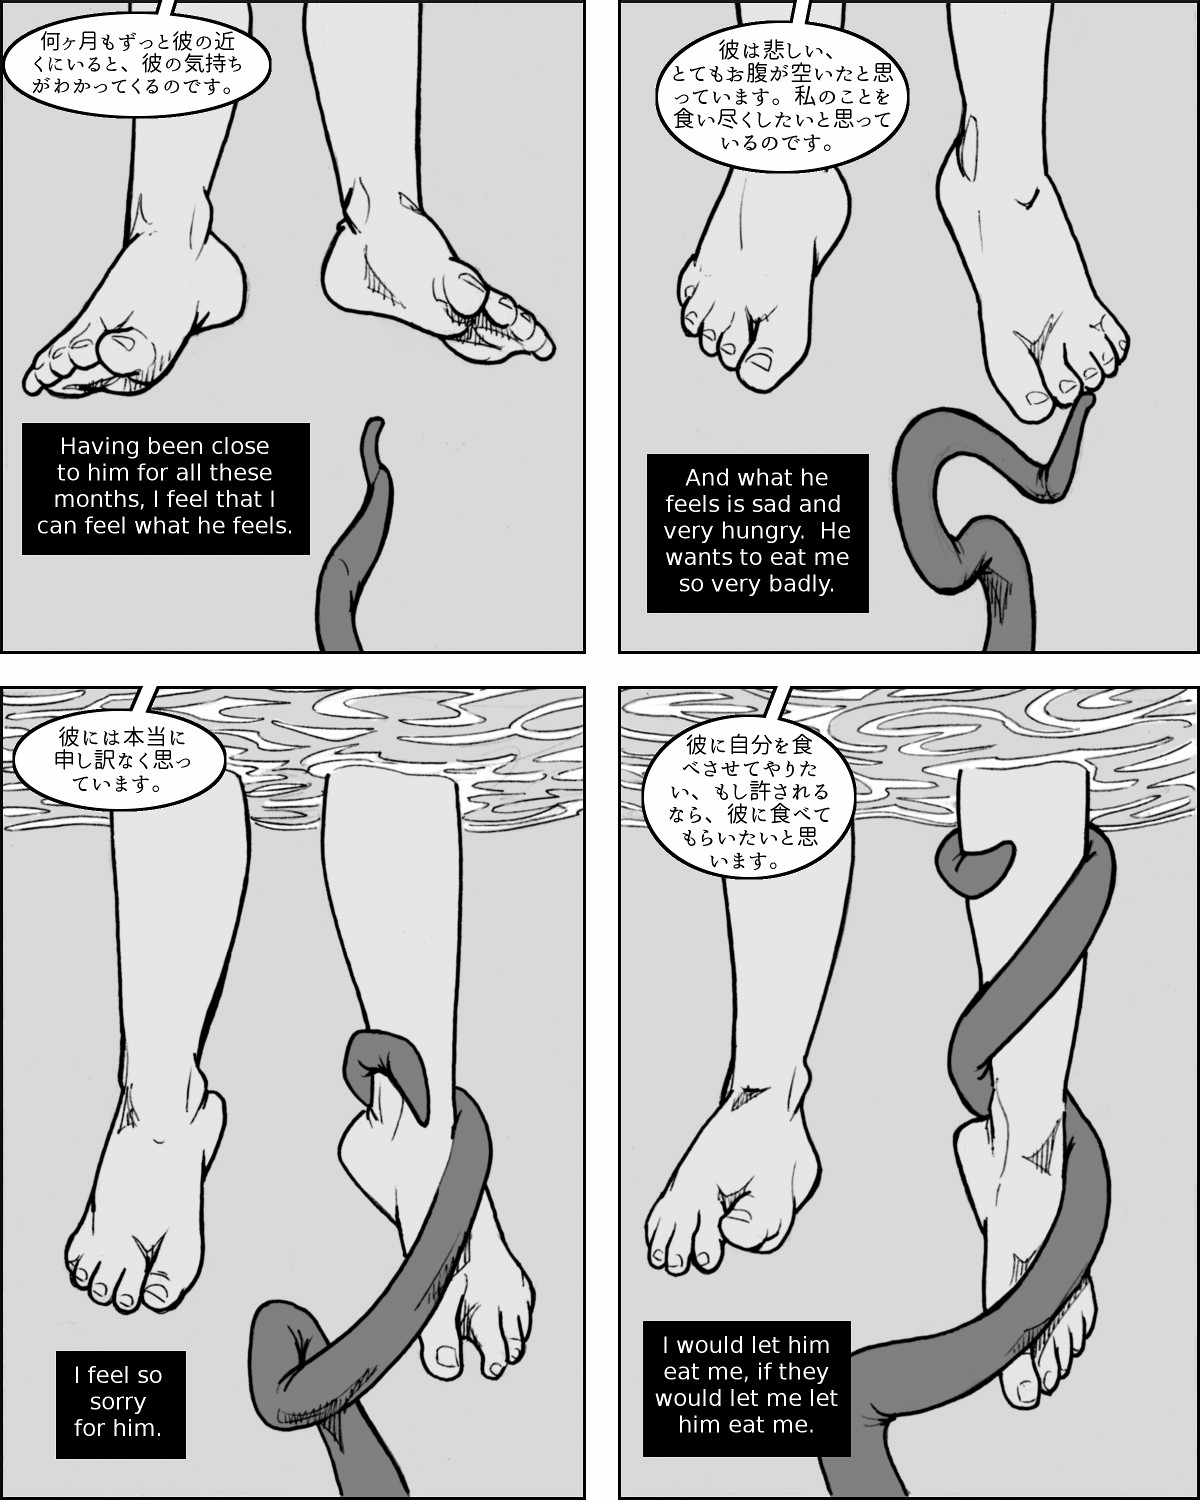 Playing footsie with the tentacle beast.